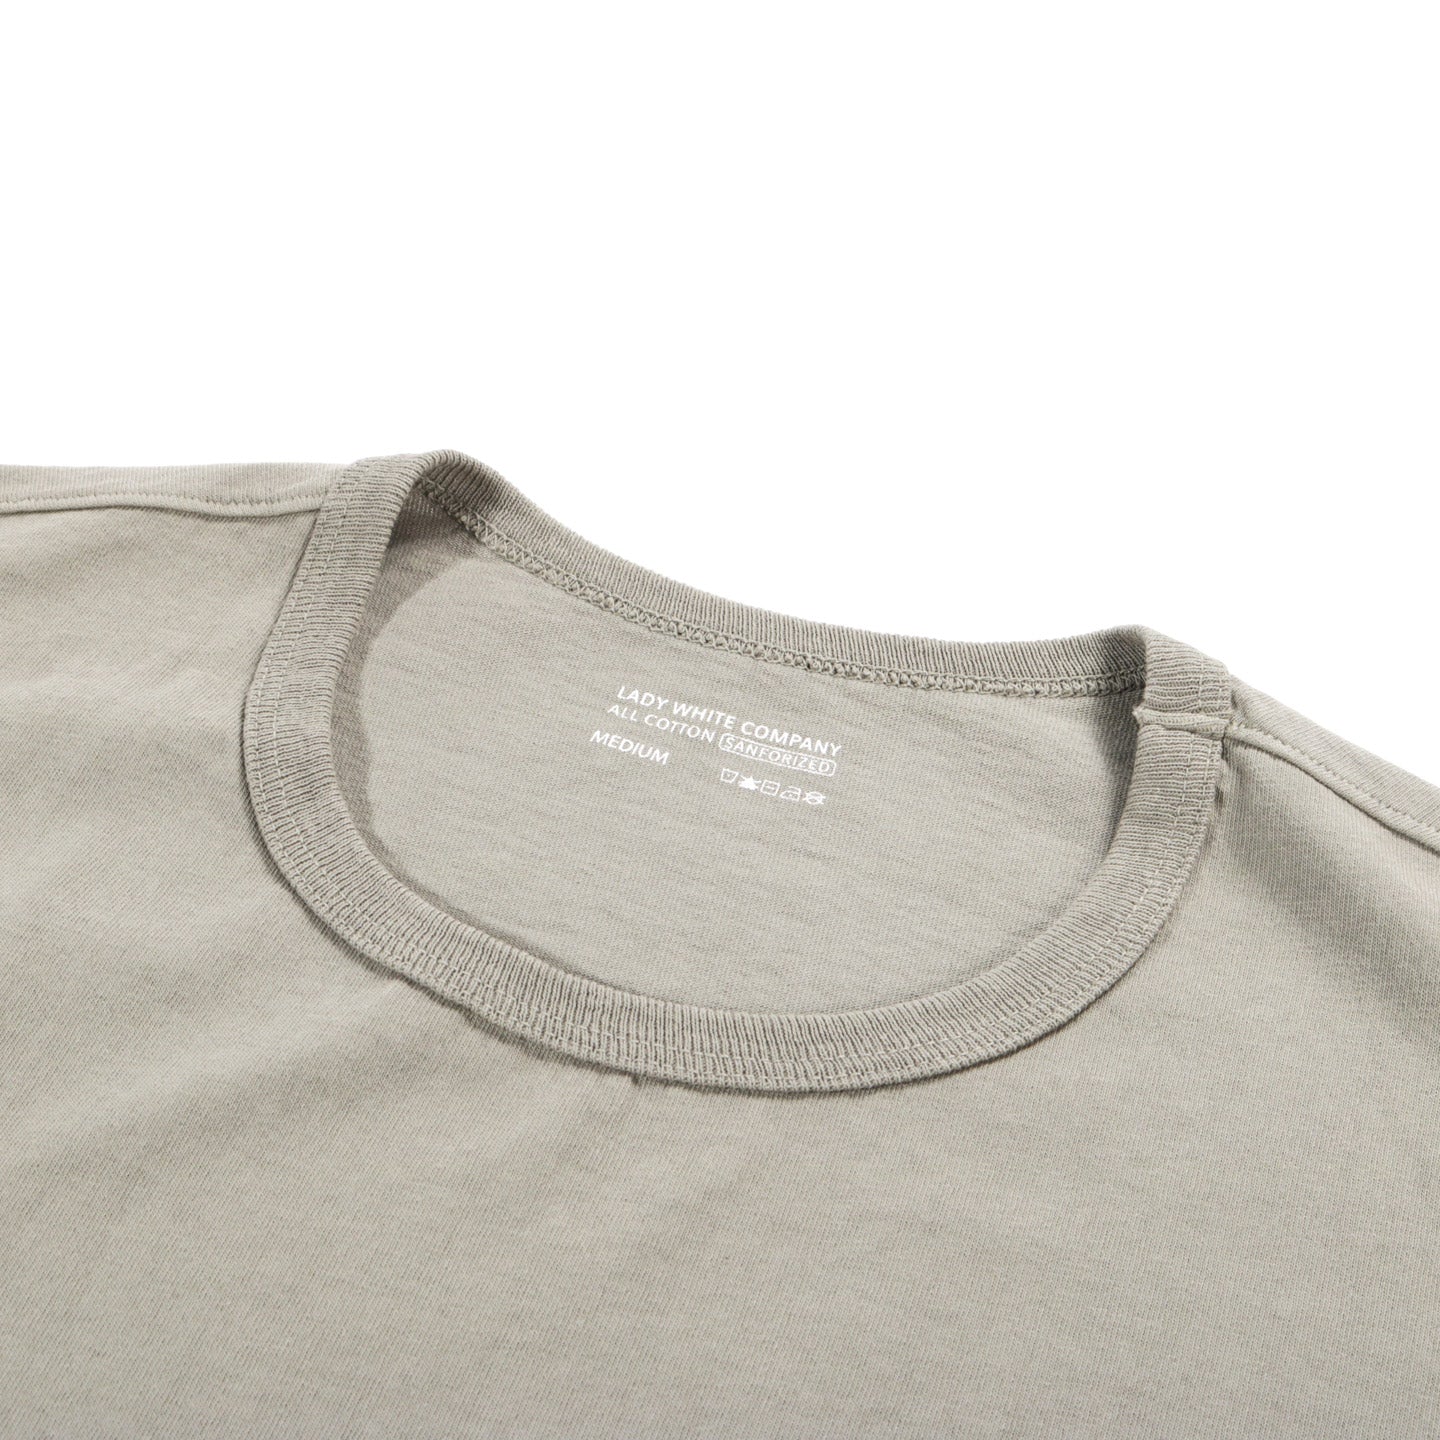 LADY WHITE CO. T-SHIRT MINERAL GREY